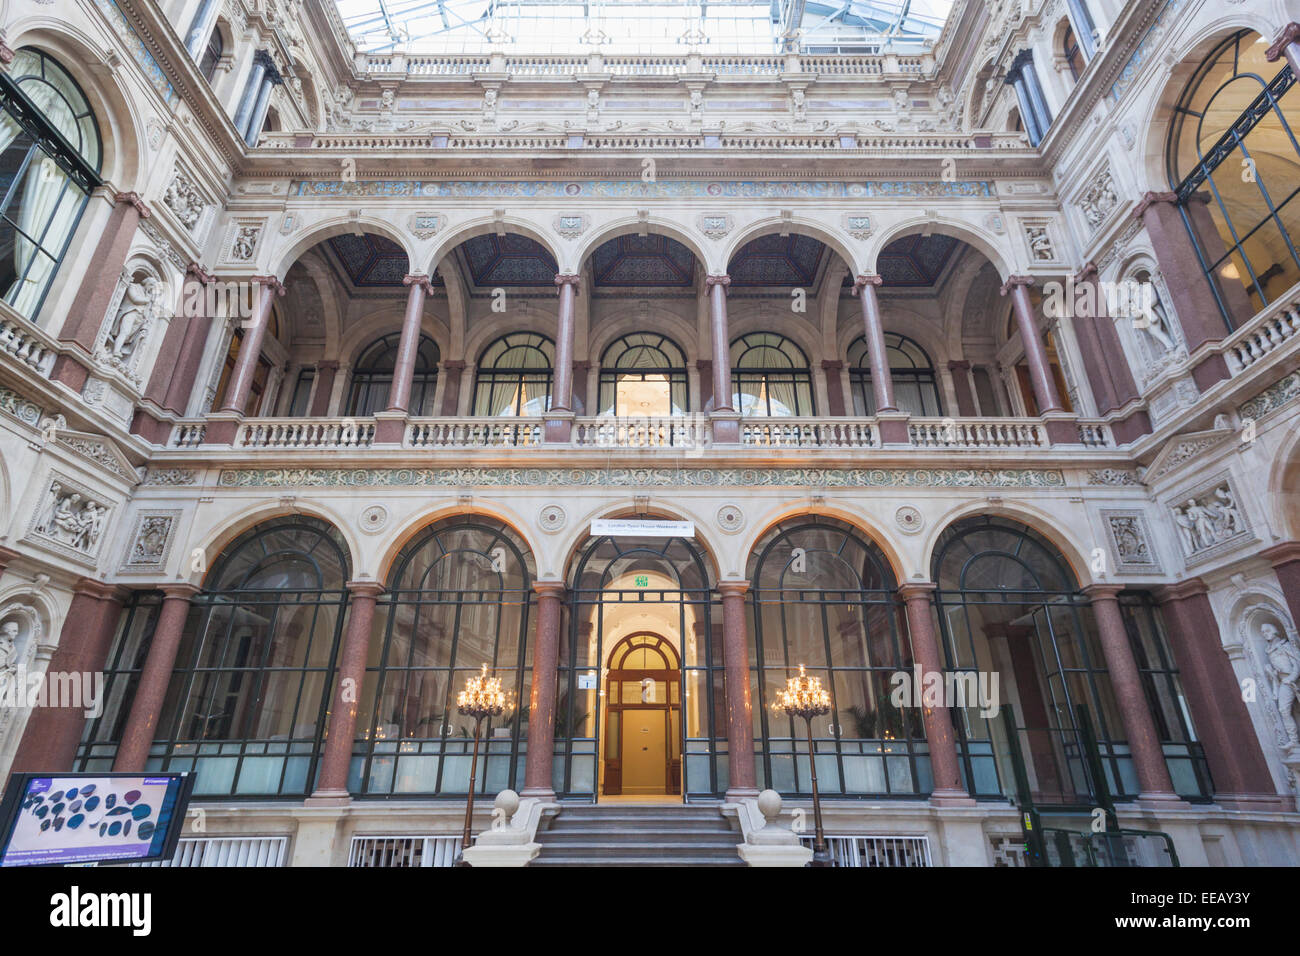 Inghilterra, Londra, Whitehall, il Foreign Office, cortile interno Foto Stock